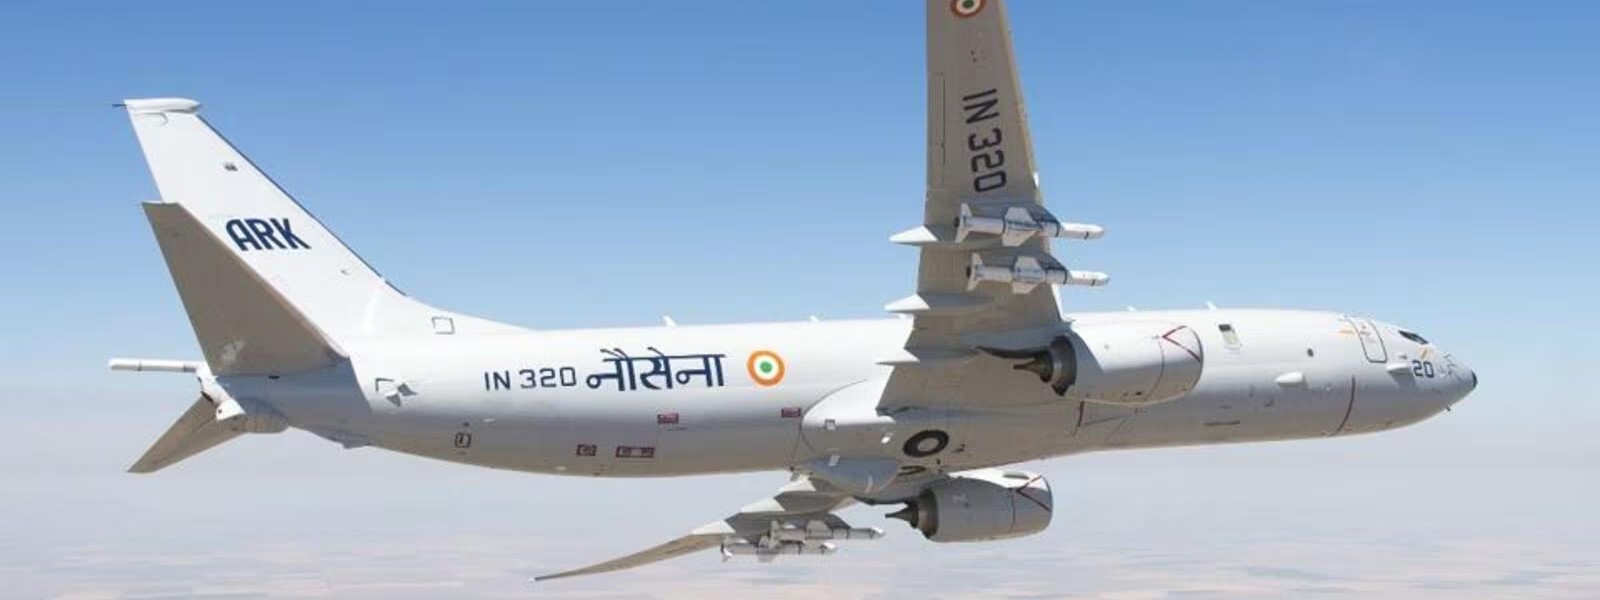 India sends spy planes to track Chinese vessels